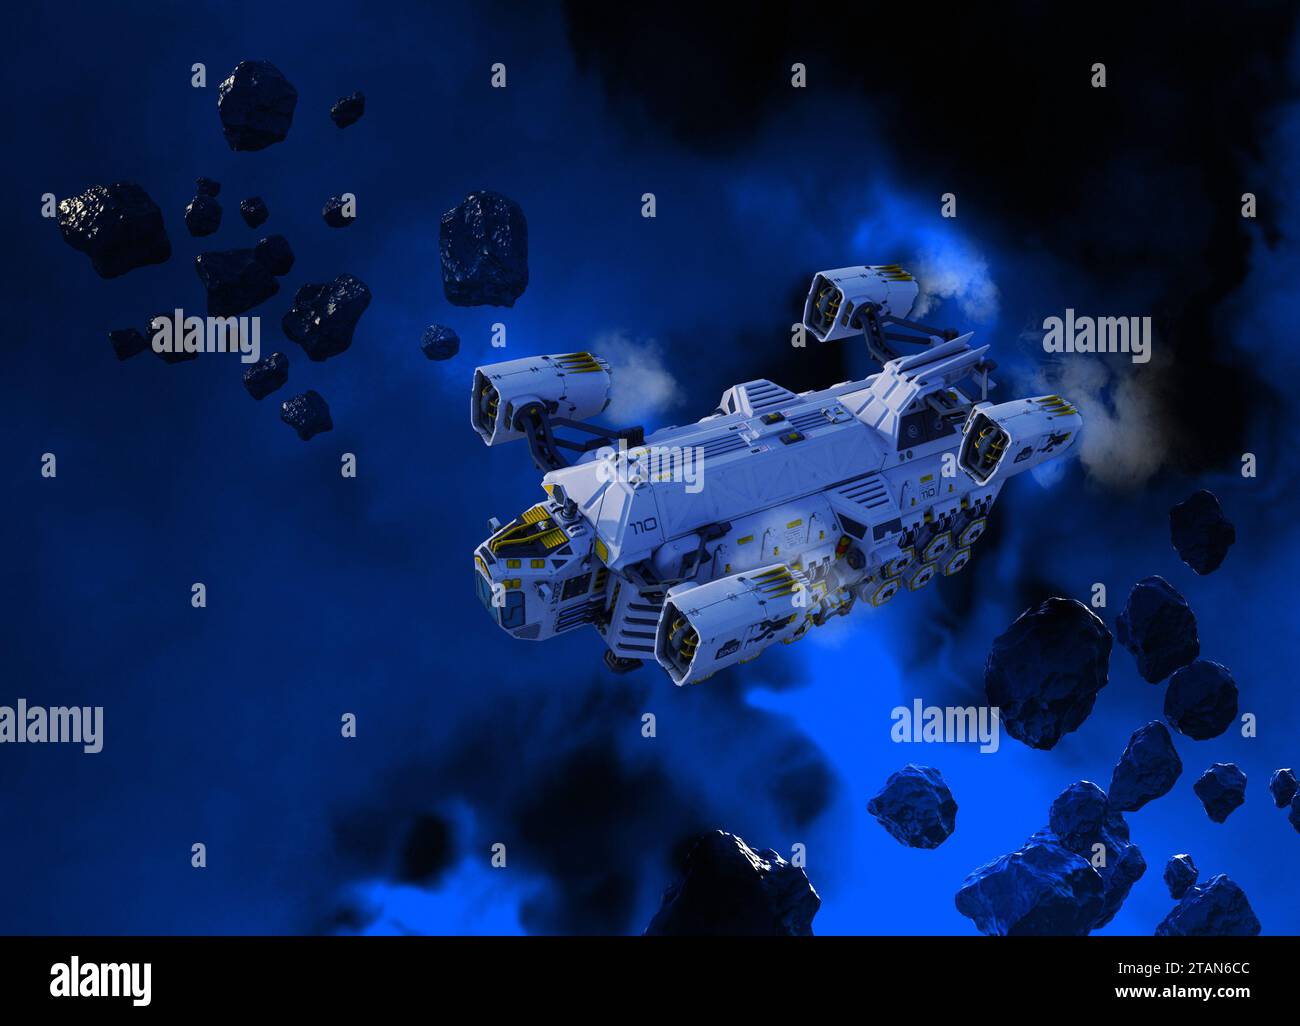 Space mining of asteroids, illustration Stock Photo